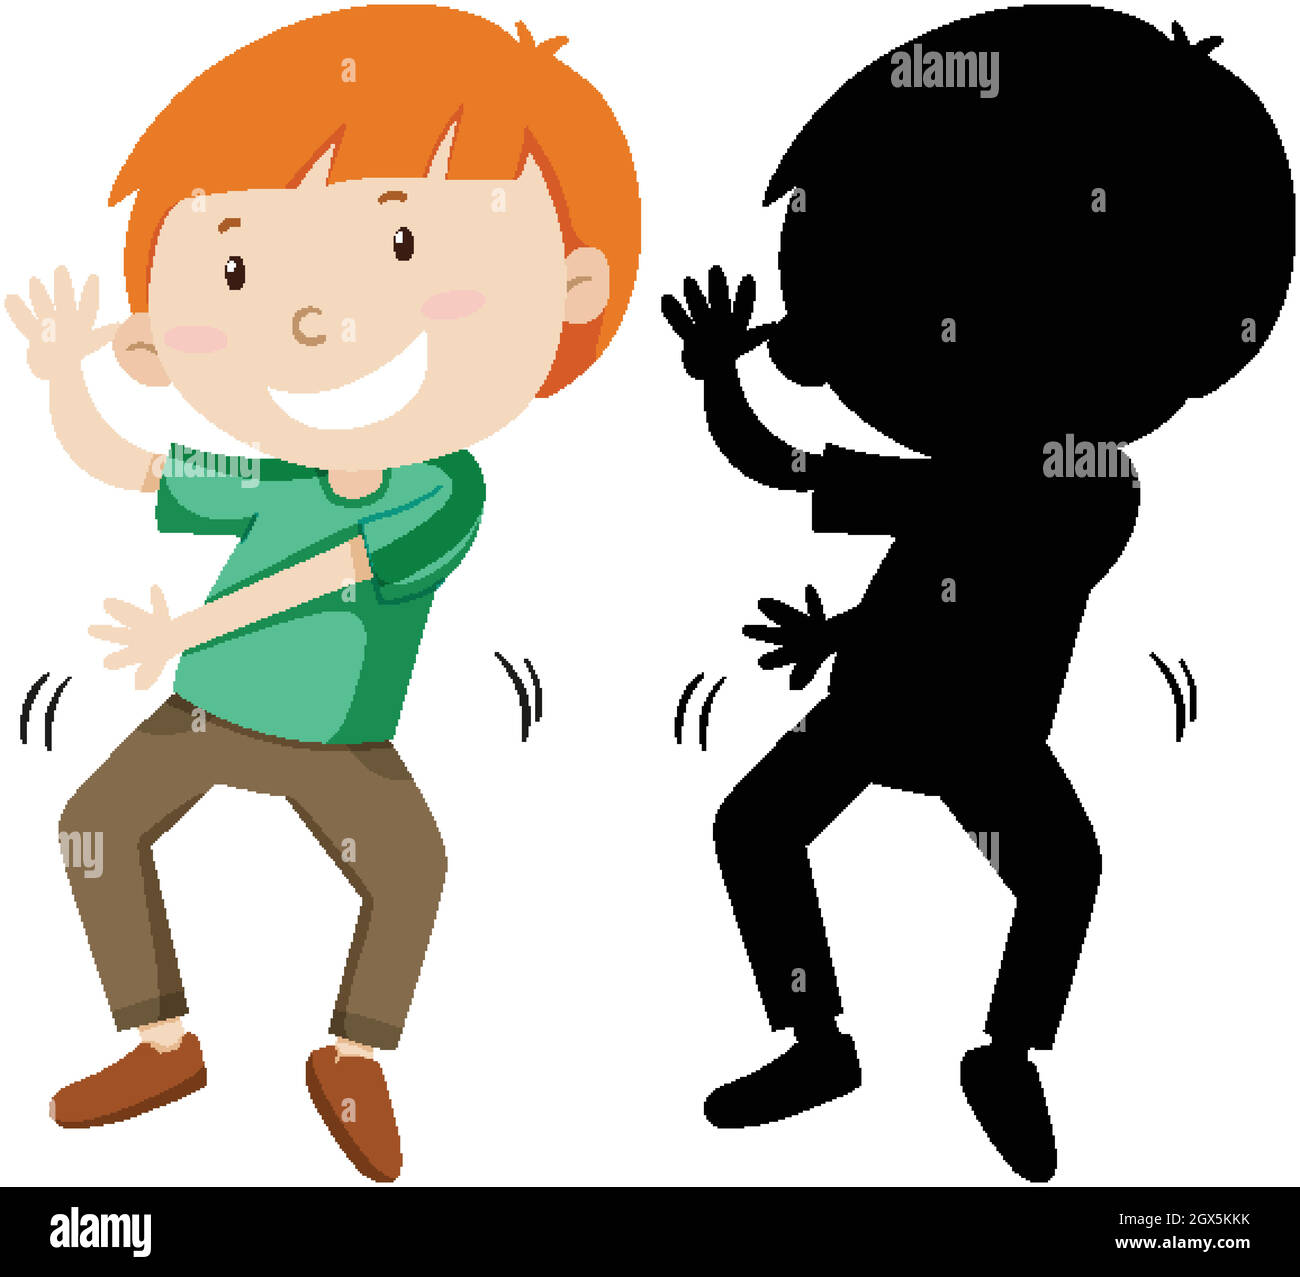 Boy dancing with its silhouette Stock Vector